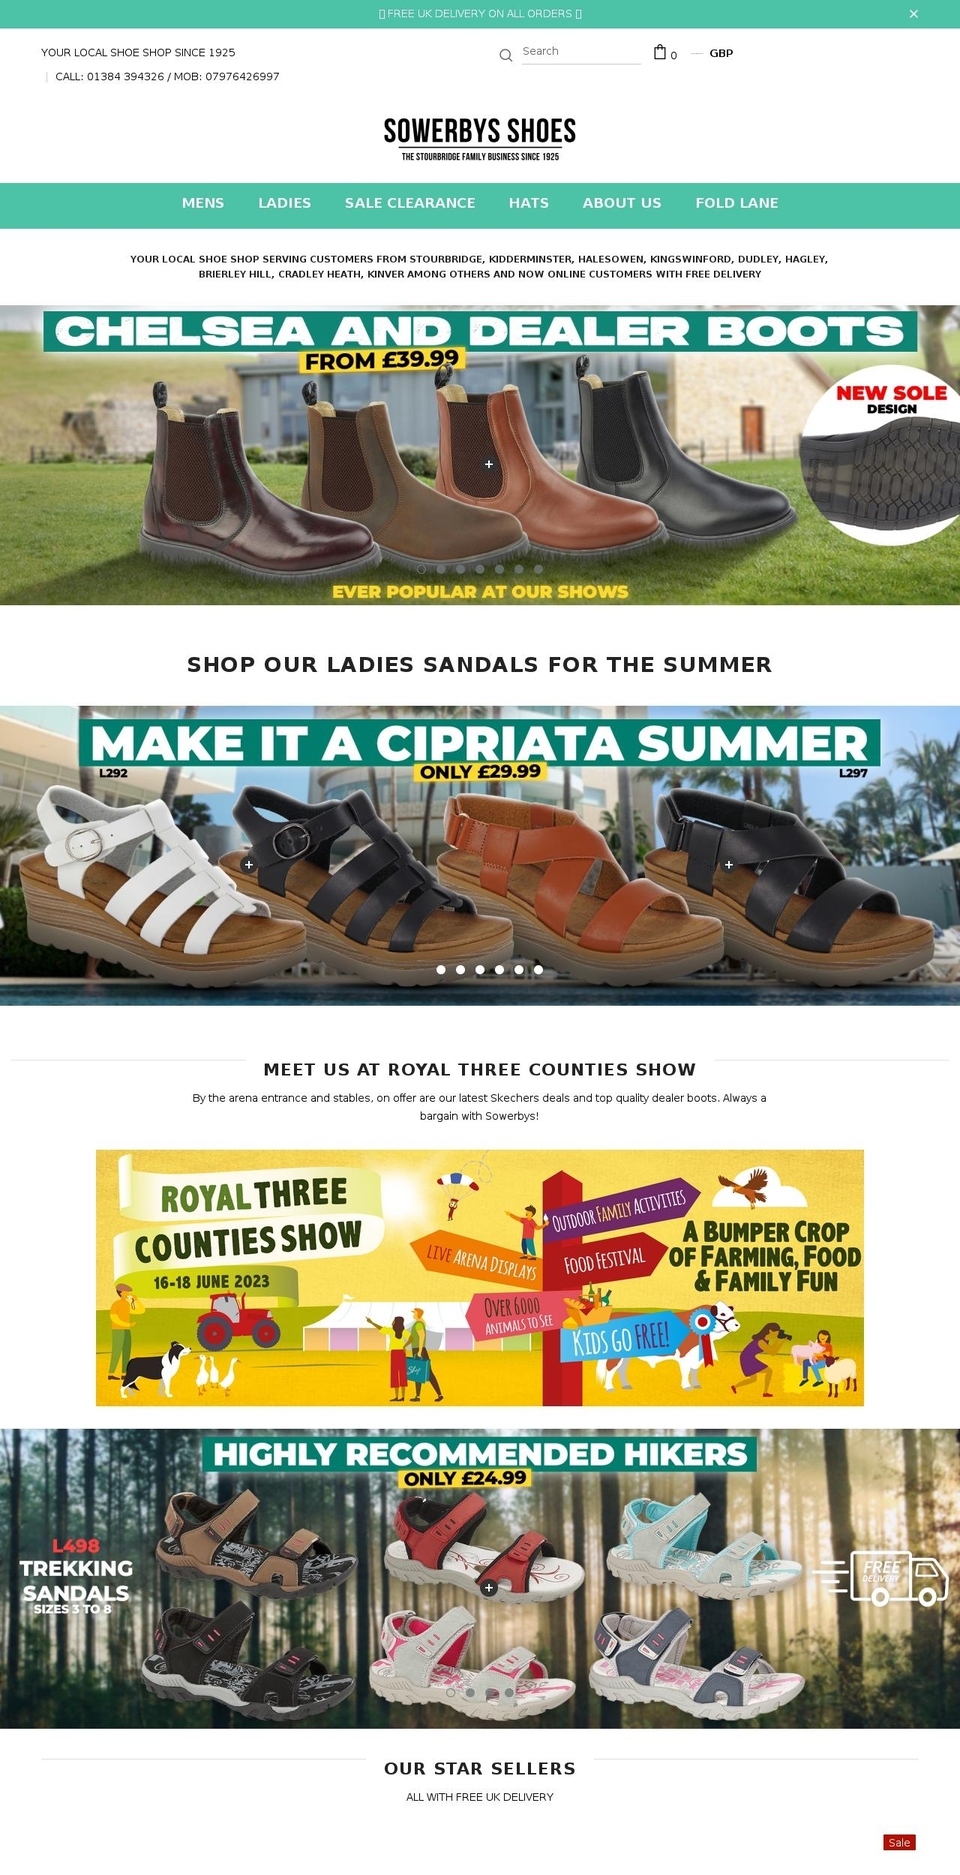 shoes Shopify theme site example sowerbysshoes.co.uk